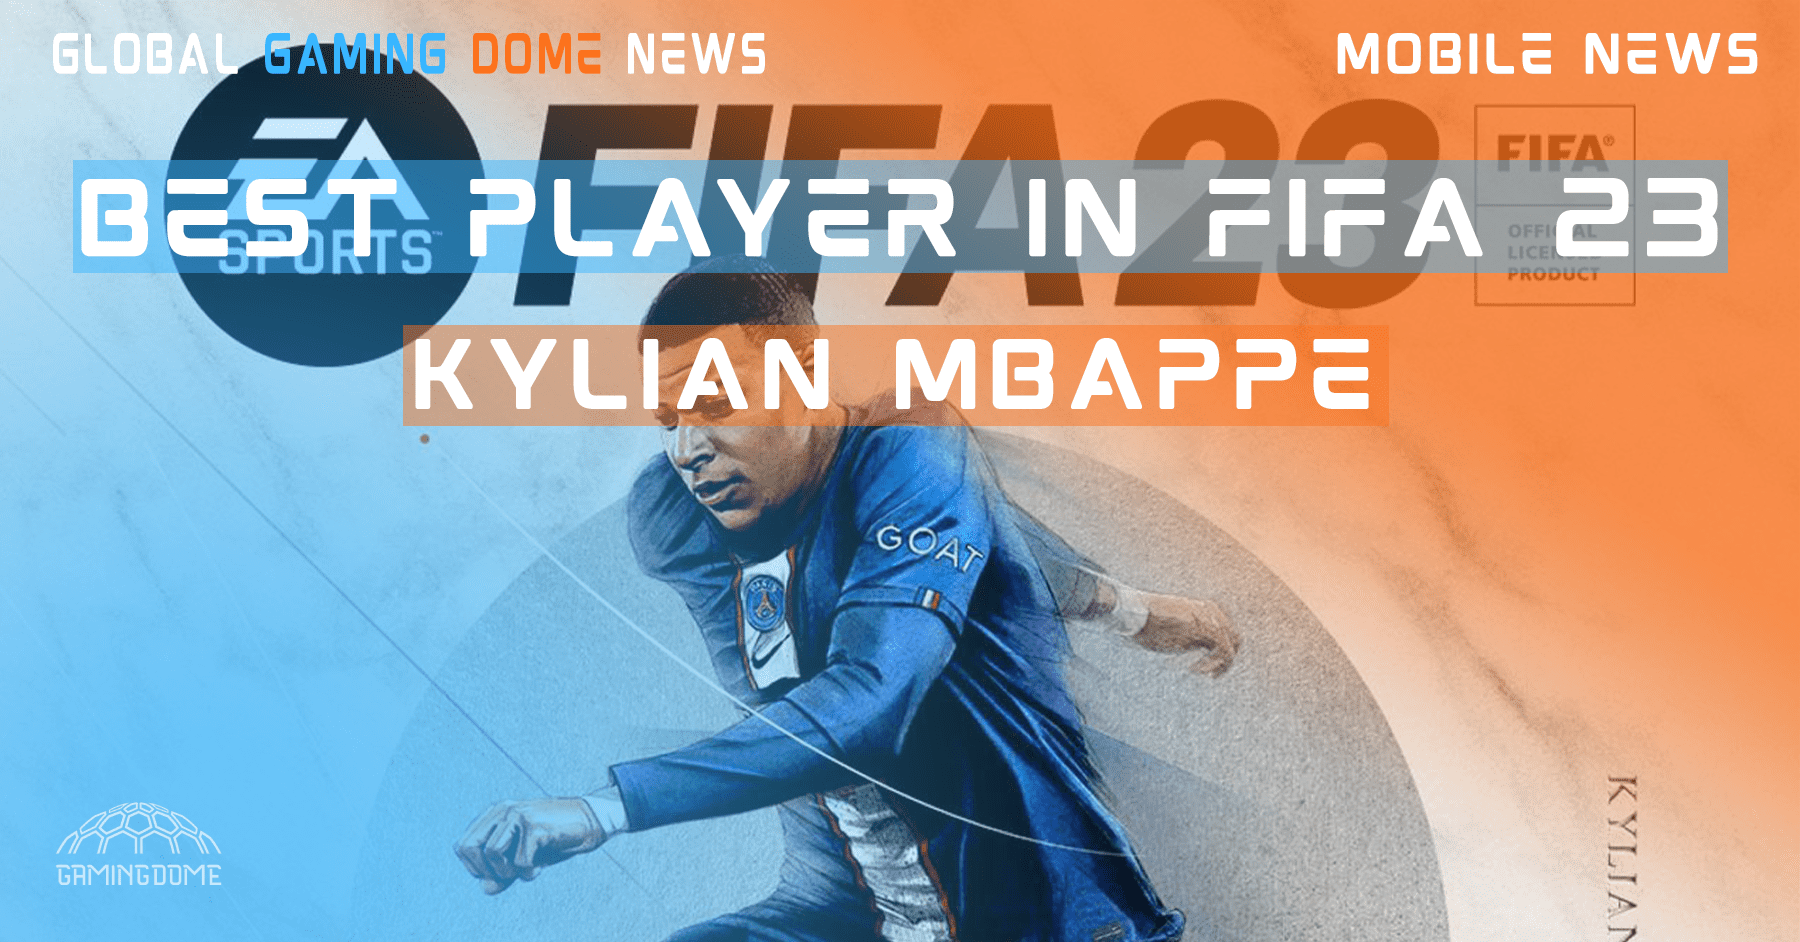 Why Kylian Mbappe is the Most Popular Player in FIFA 23